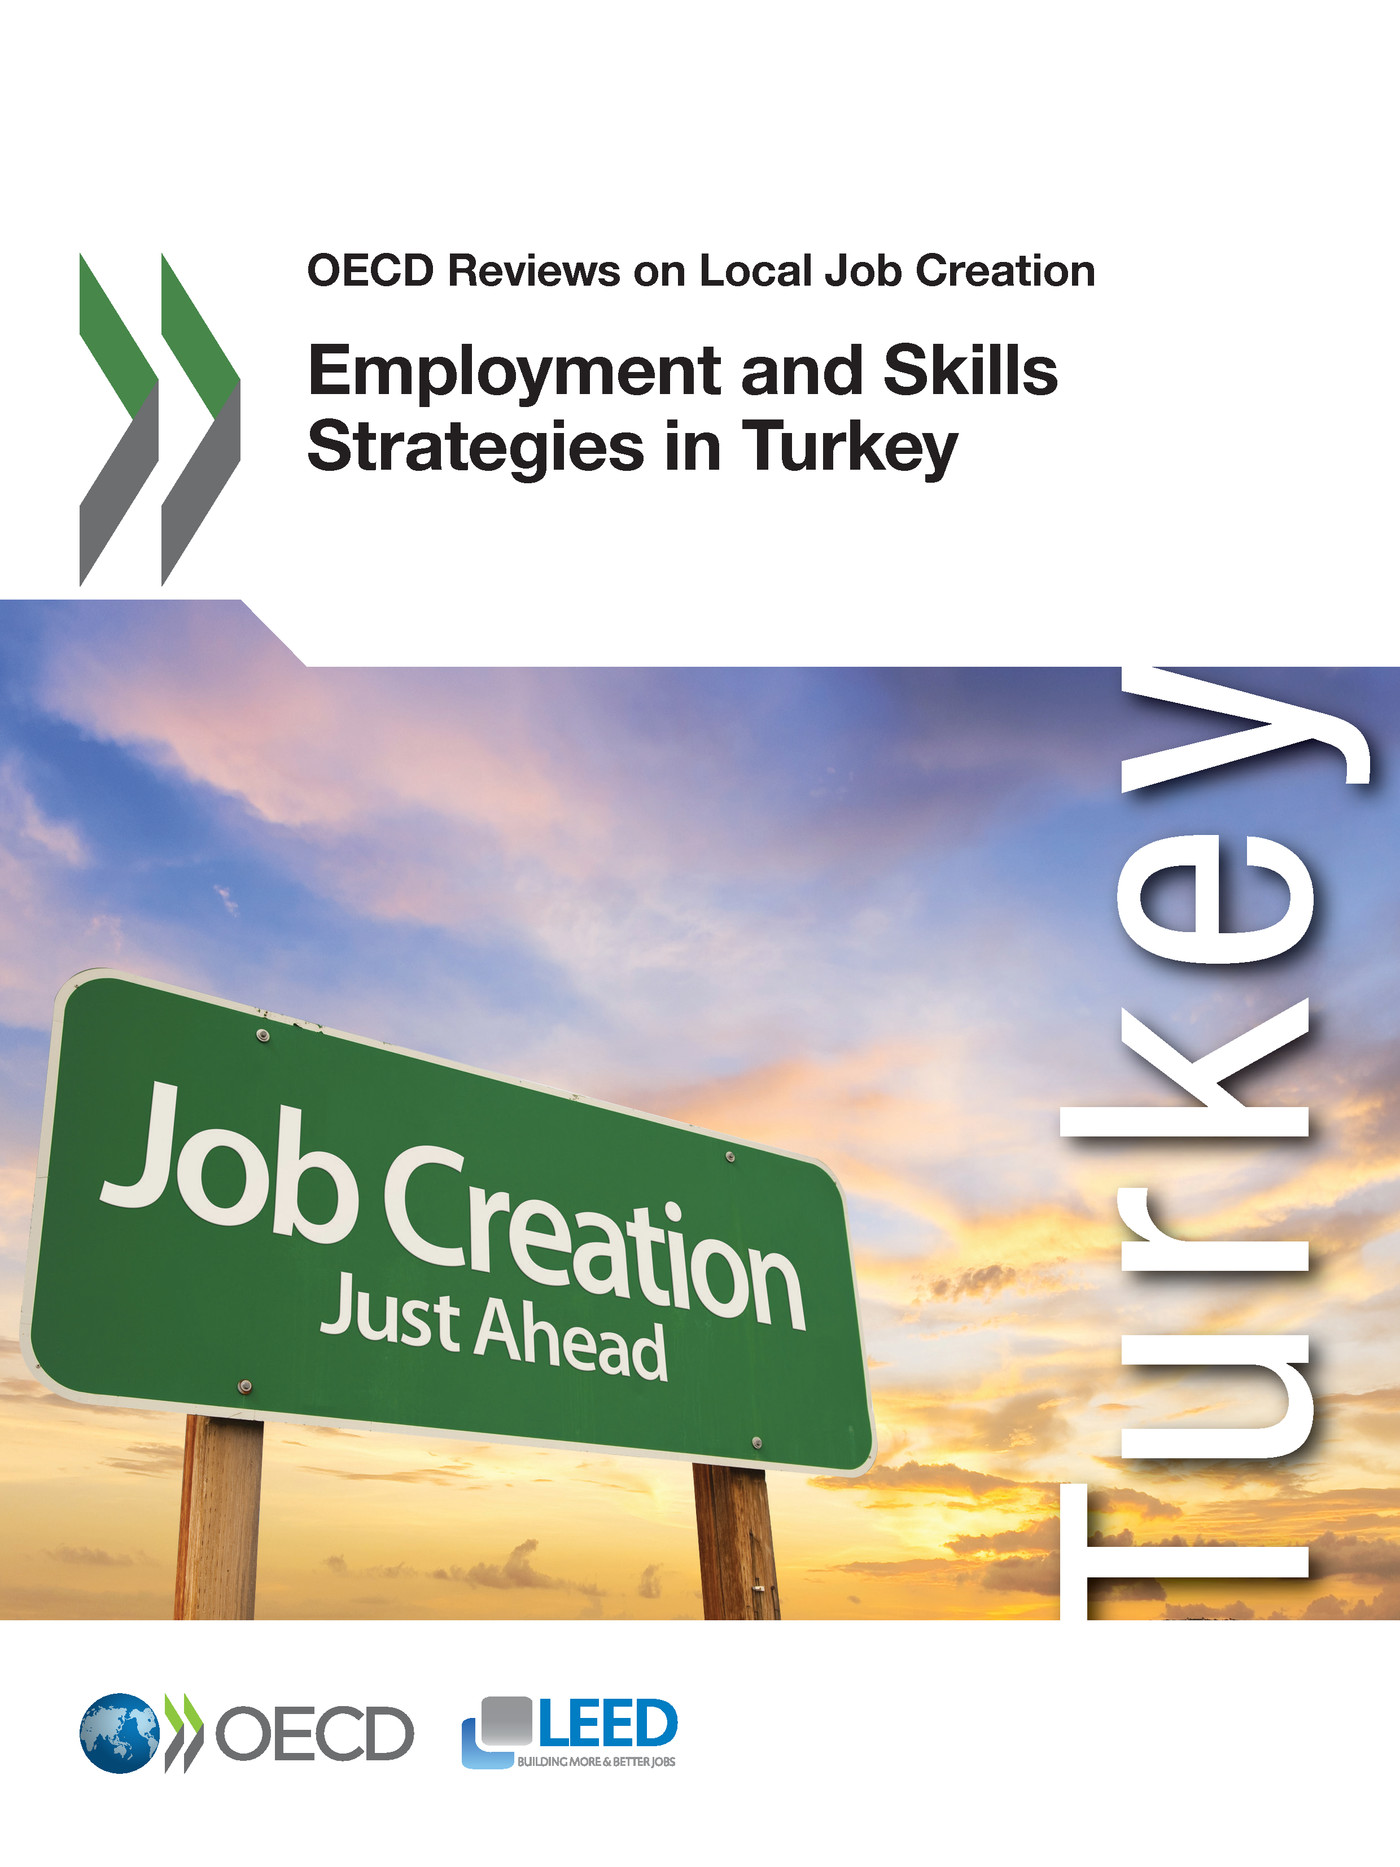 Employment and Skills Strategies in Turkey -  Collectif - OCDE / OECD